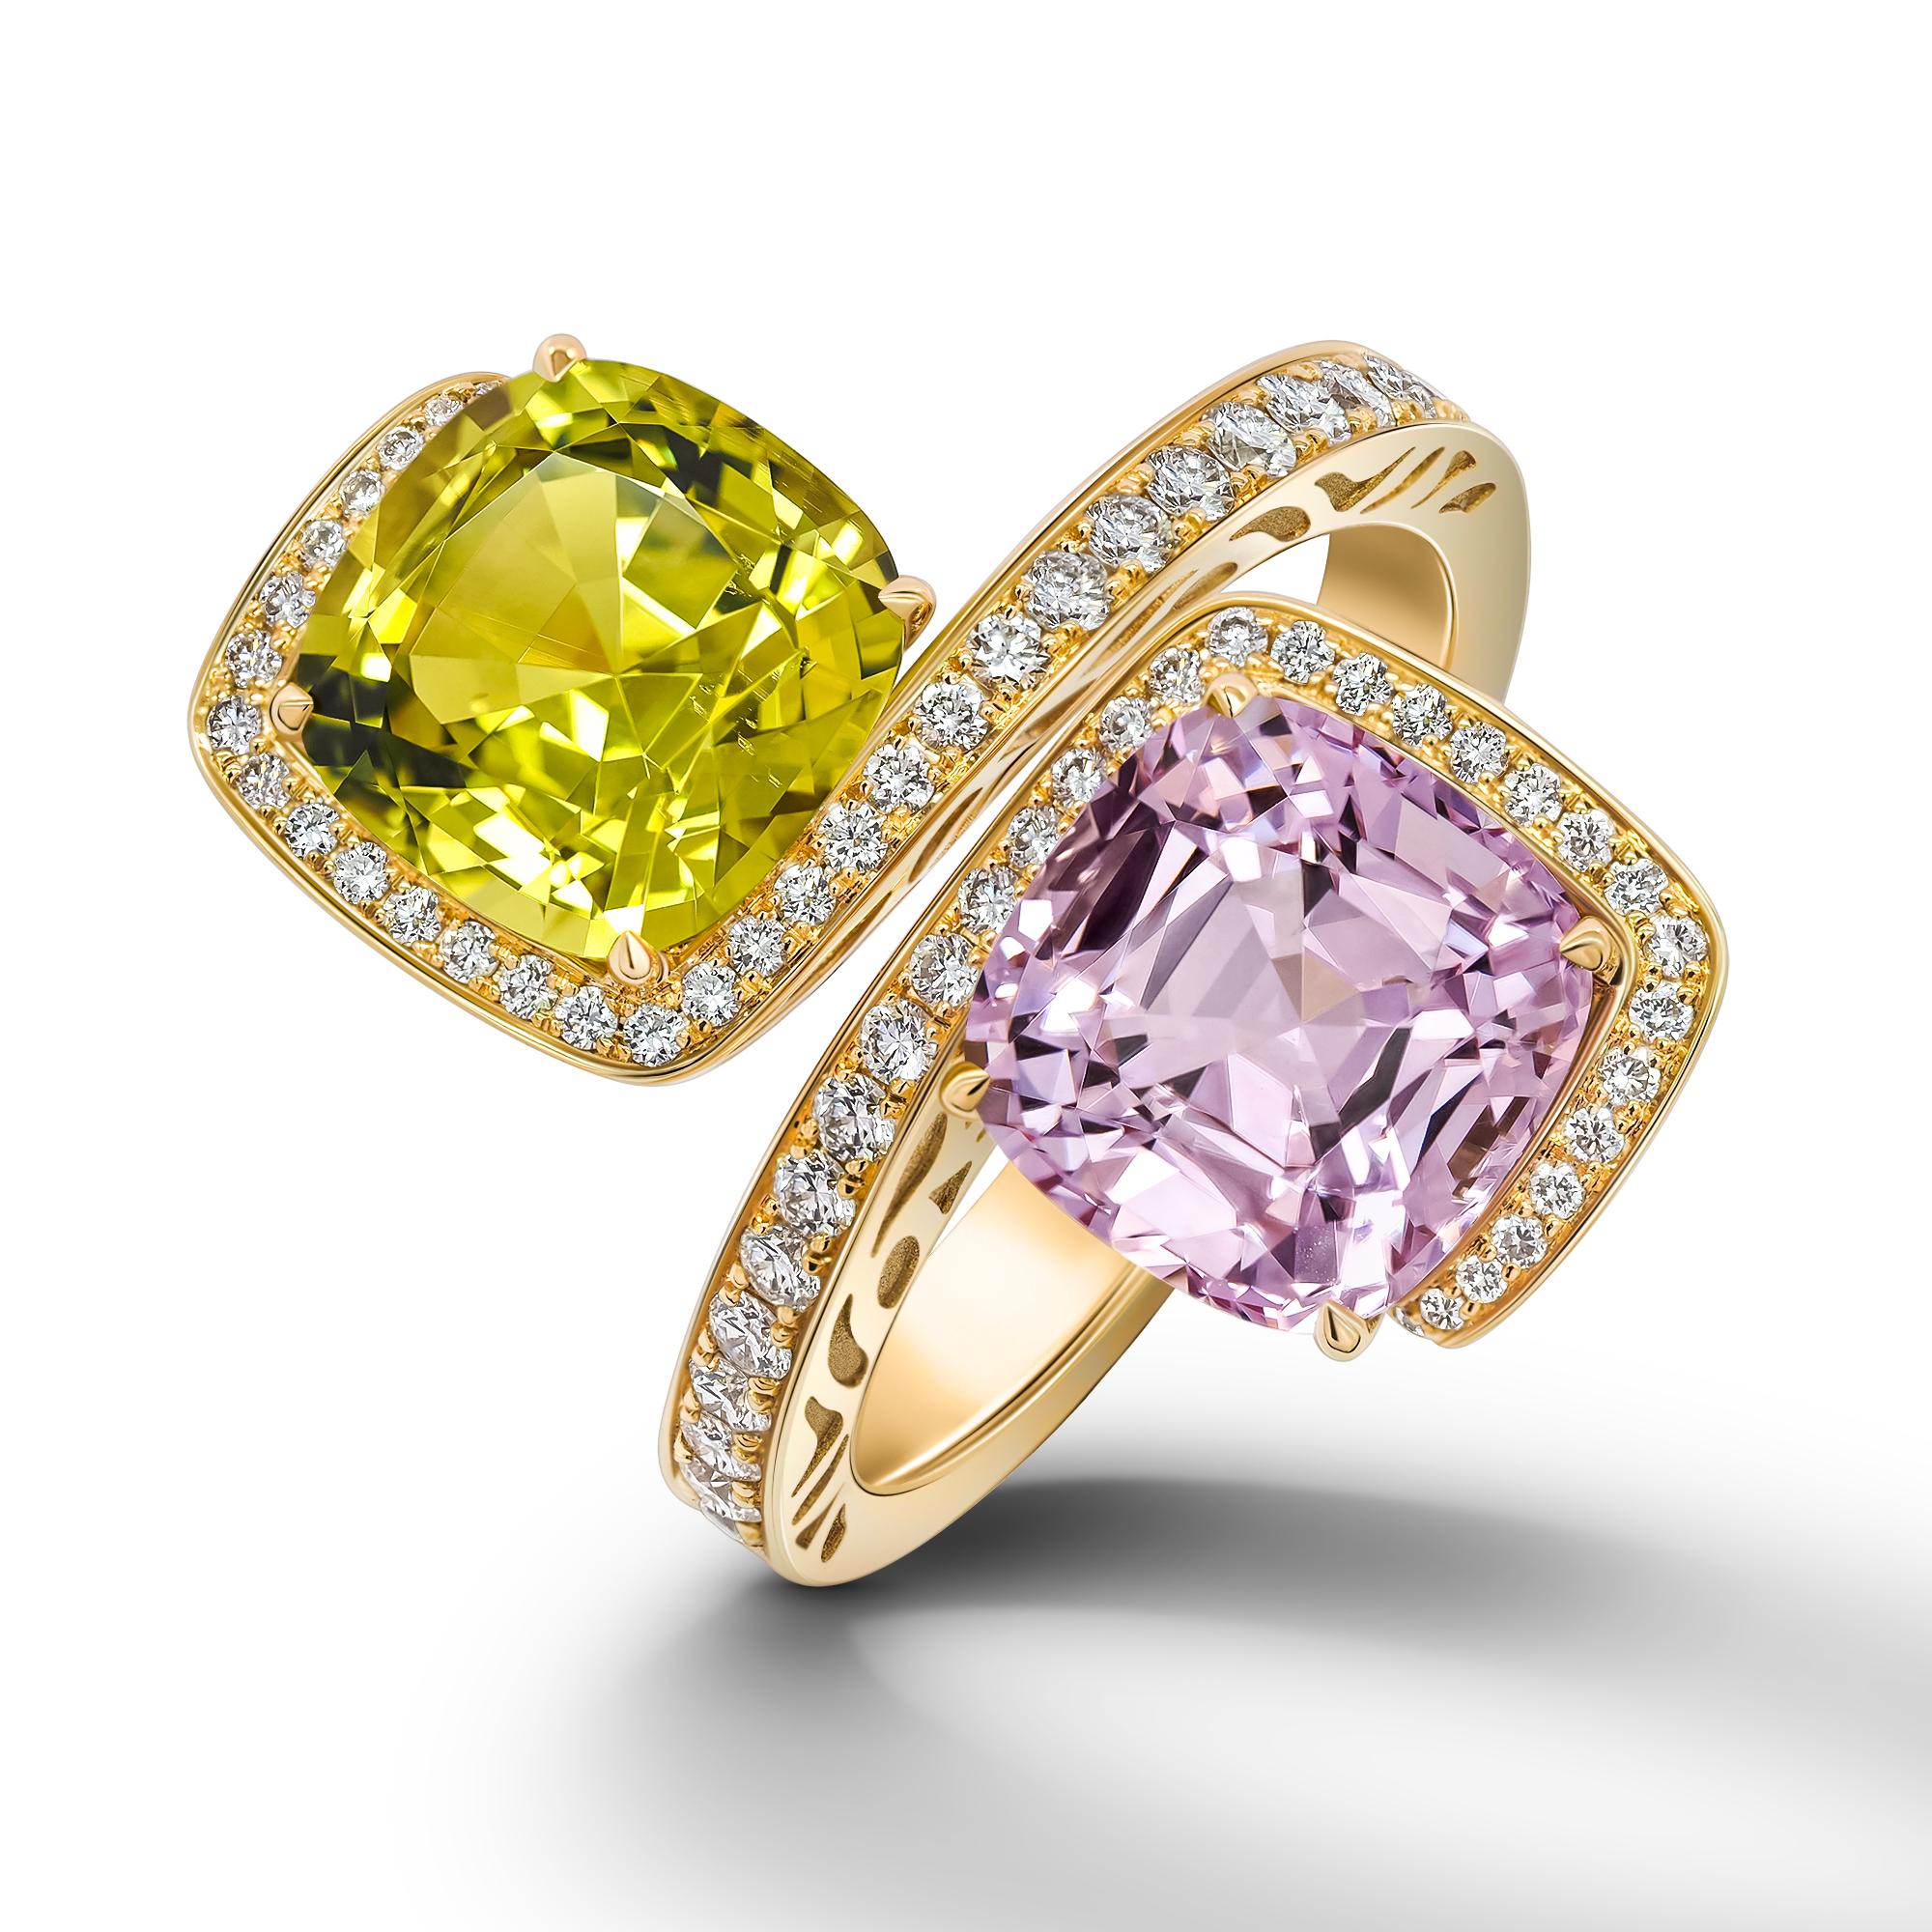 •	18K Yellow gold.  
•	Light Pink spinel in antique cushion cut – total carat weight 3.73. 
•	Yellow-Green Chrysoberyl in antique cushion cut – total carat weight 3.59. 
•	Diamonds – 70 pc in round cut – total carat weight 0.48.
•	Ring size –